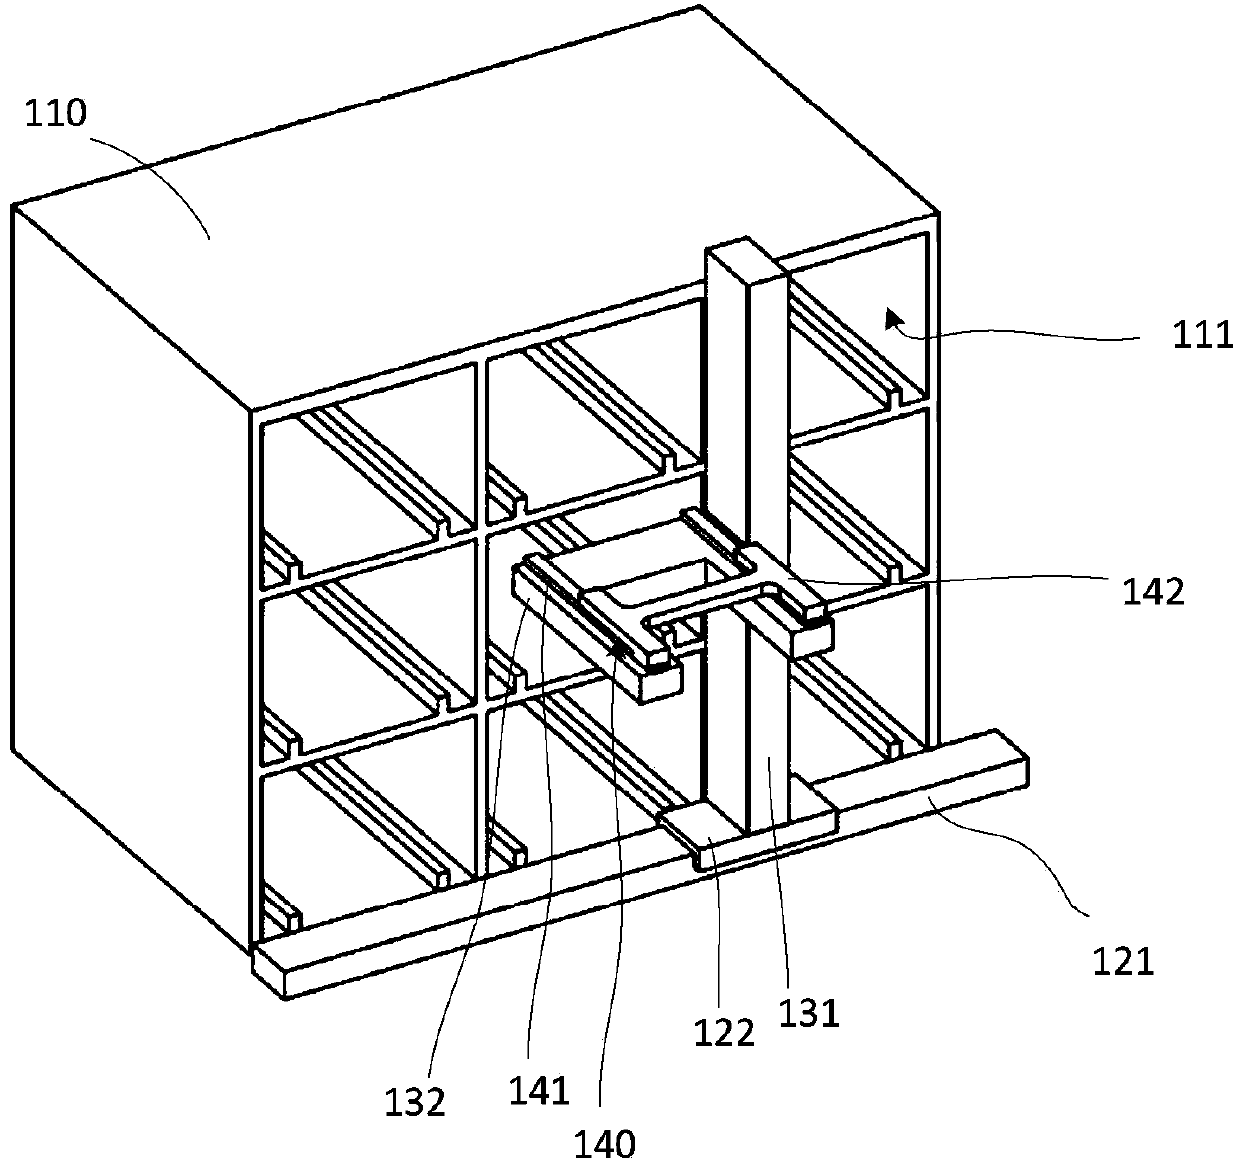 Seaport container stereo storage system and method